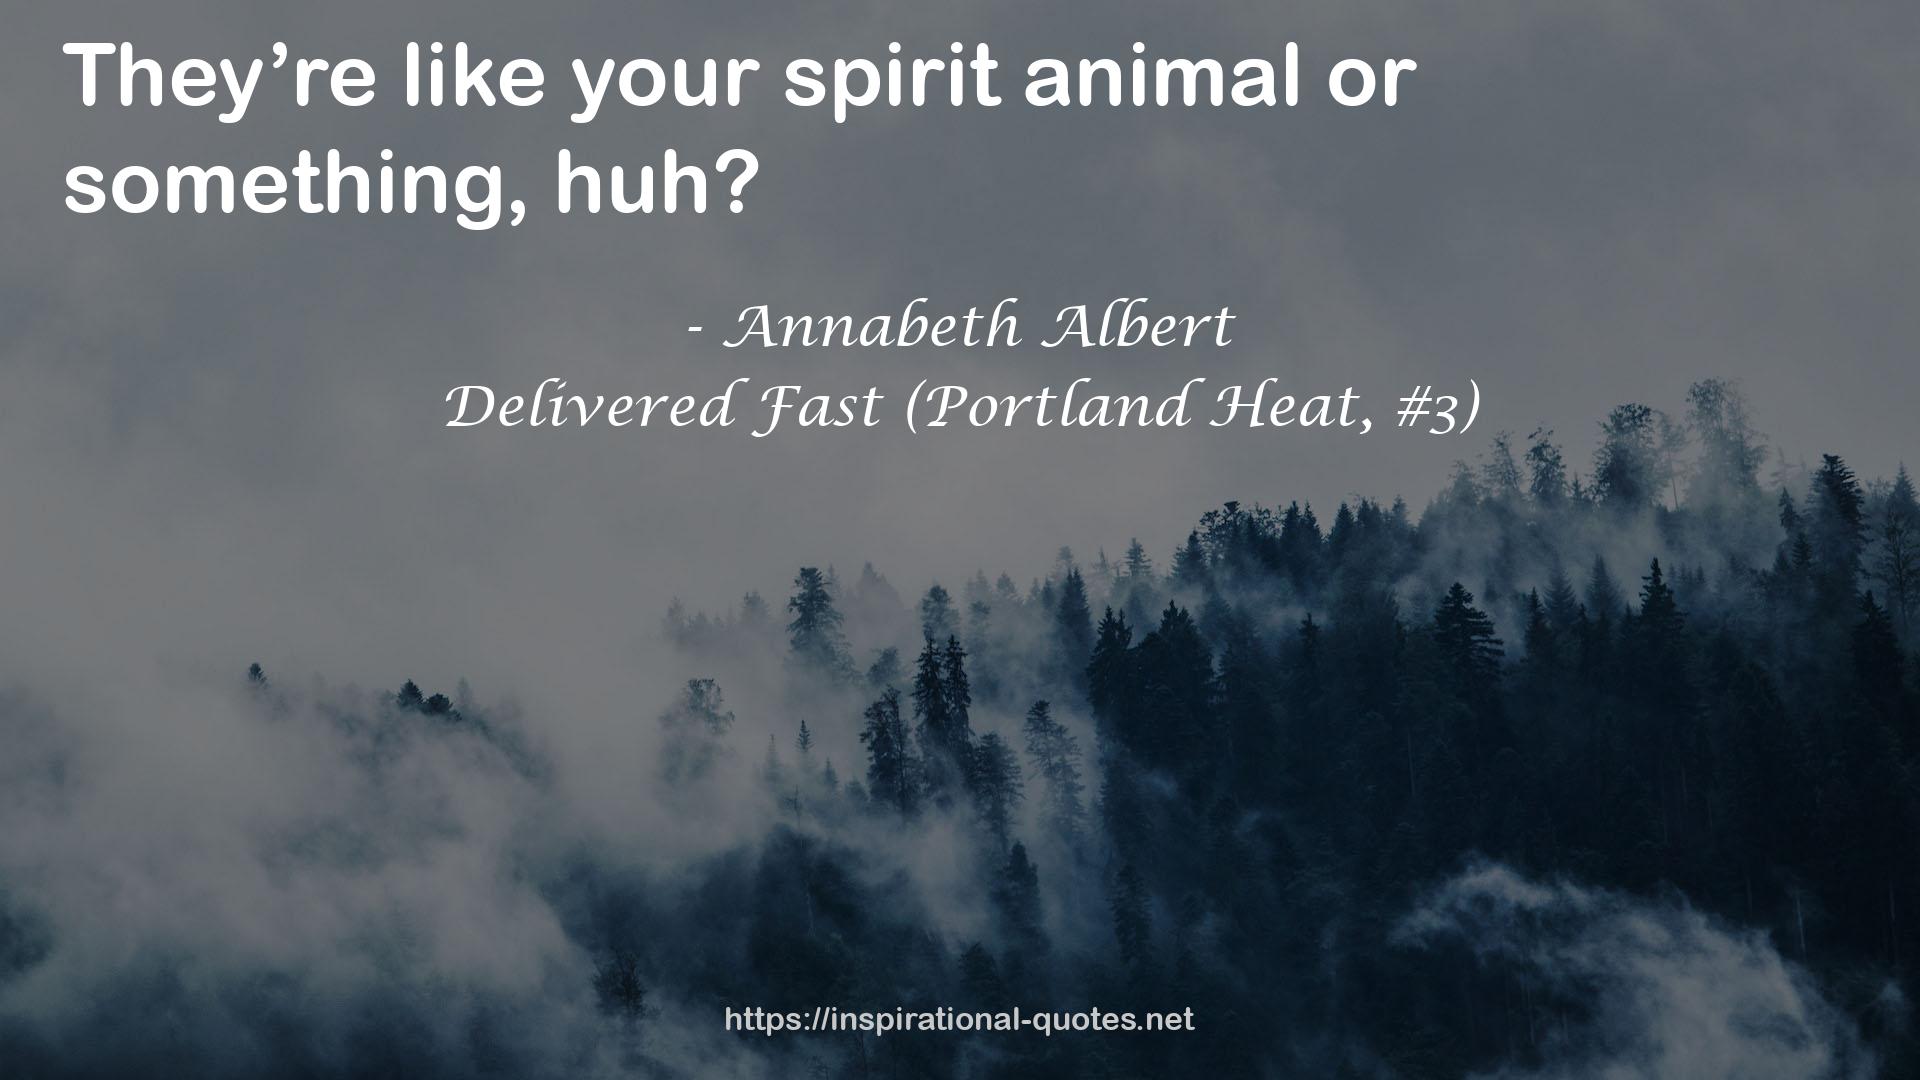 Delivered Fast (Portland Heat, #3) QUOTES